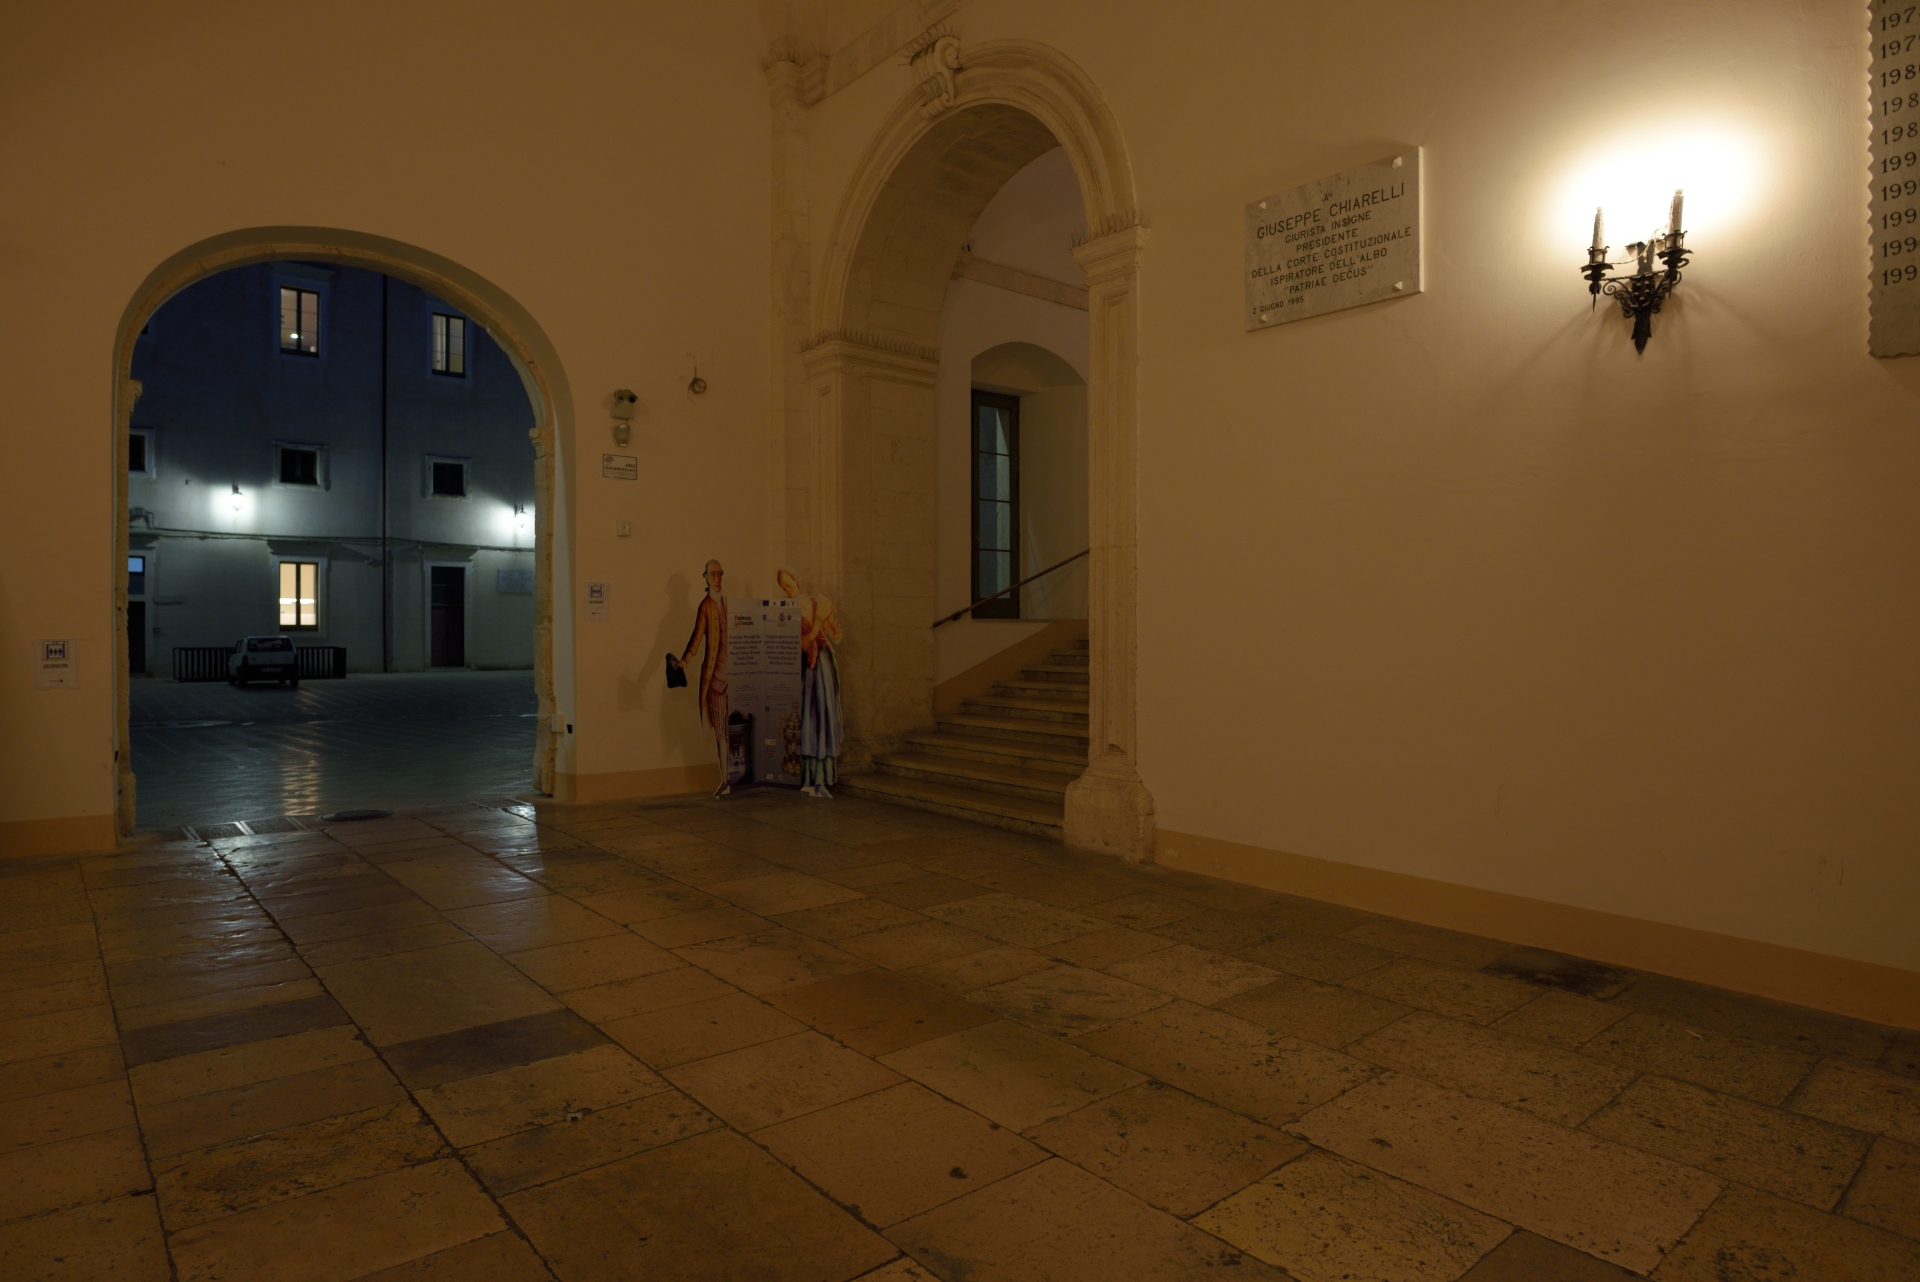 Palazzo ducale...